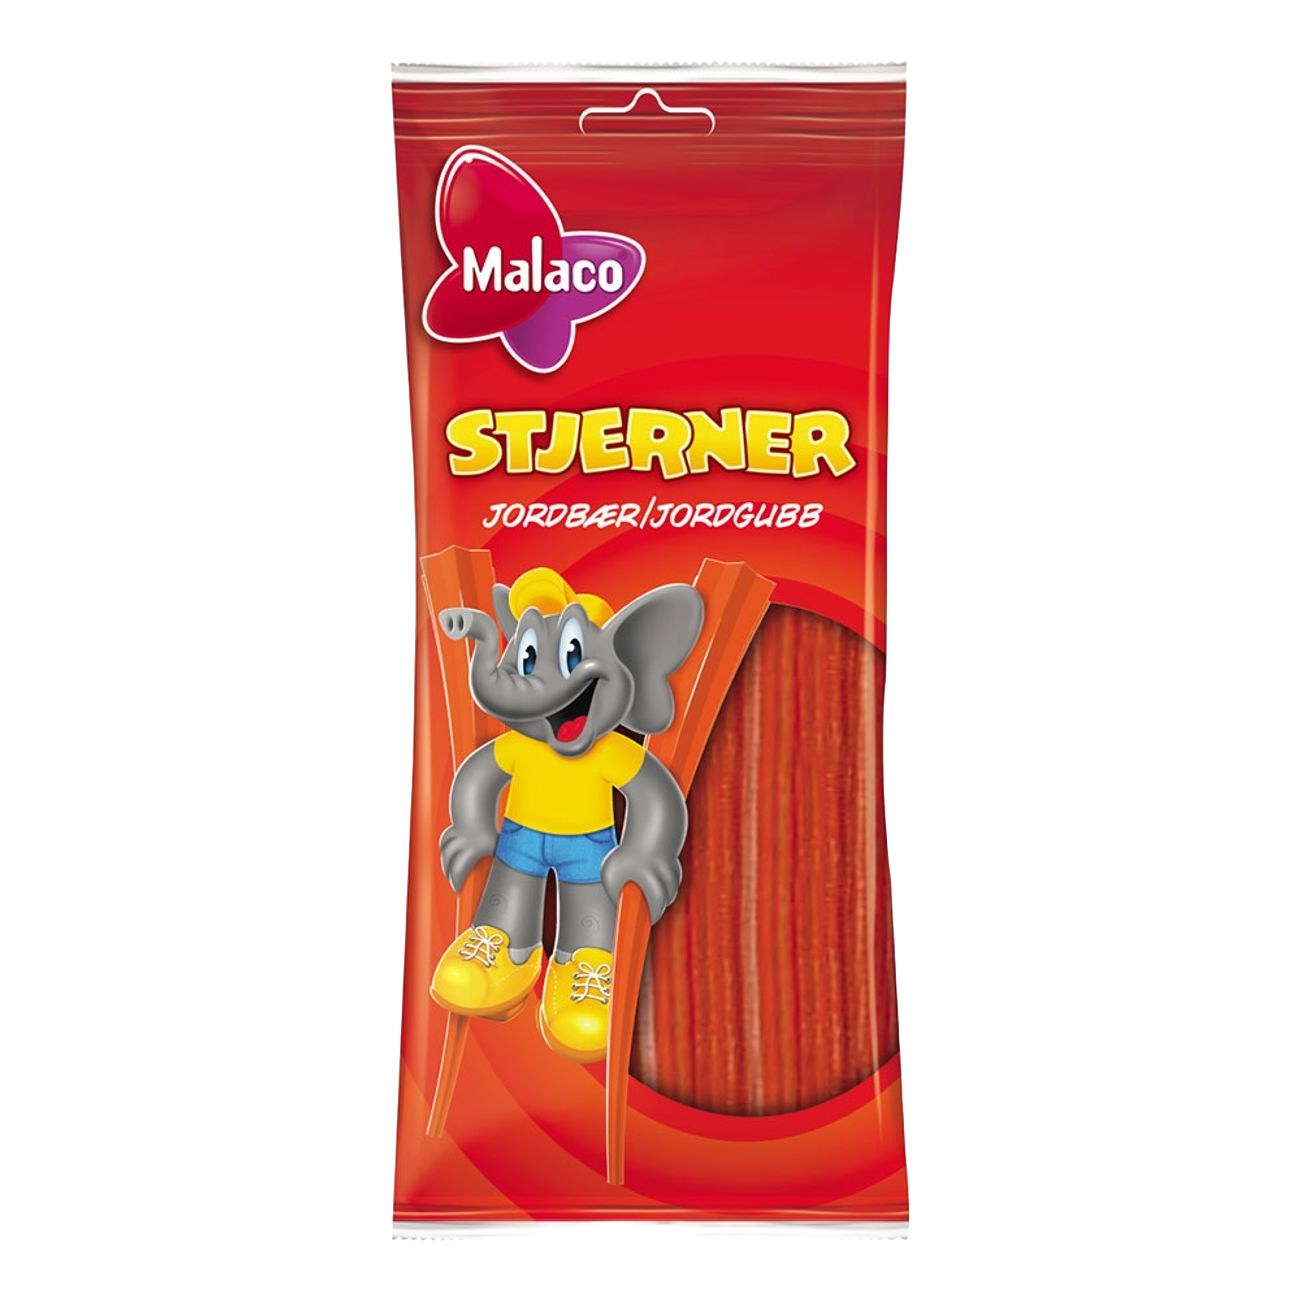 Malaco Stjerner Strawberry is a Swedish candy strings shaped like charming stars are made with real strawberry flavor!